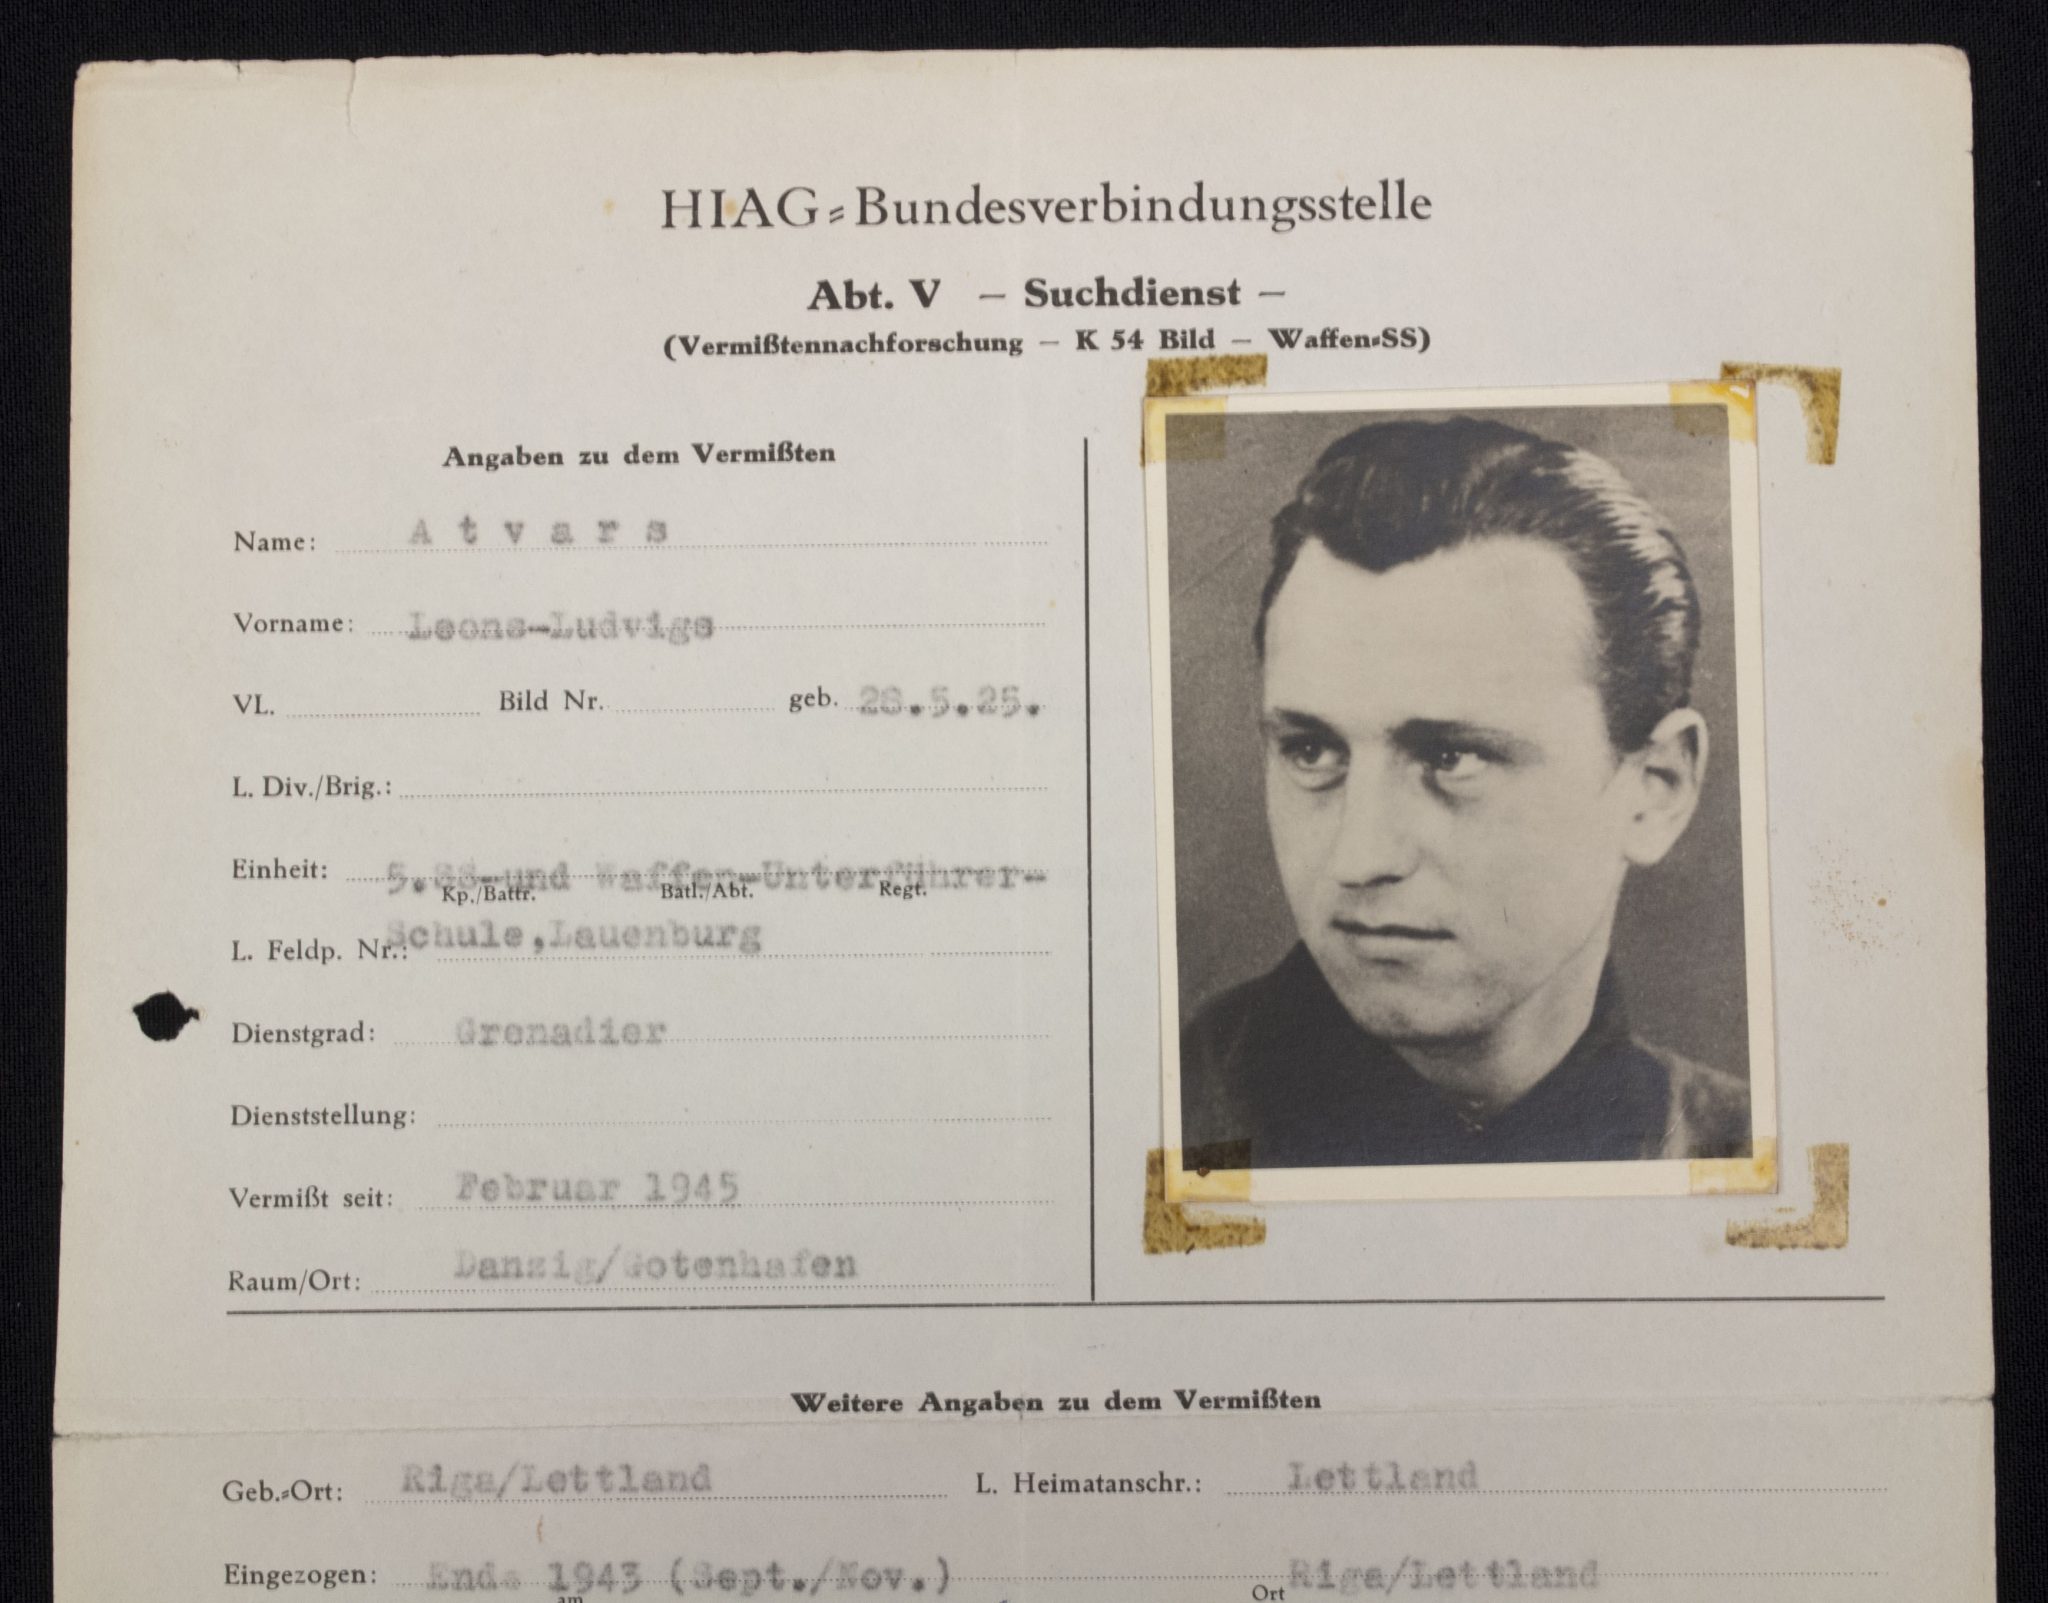 SS - Hiag Tracing Service File card for a SS-Grenadier